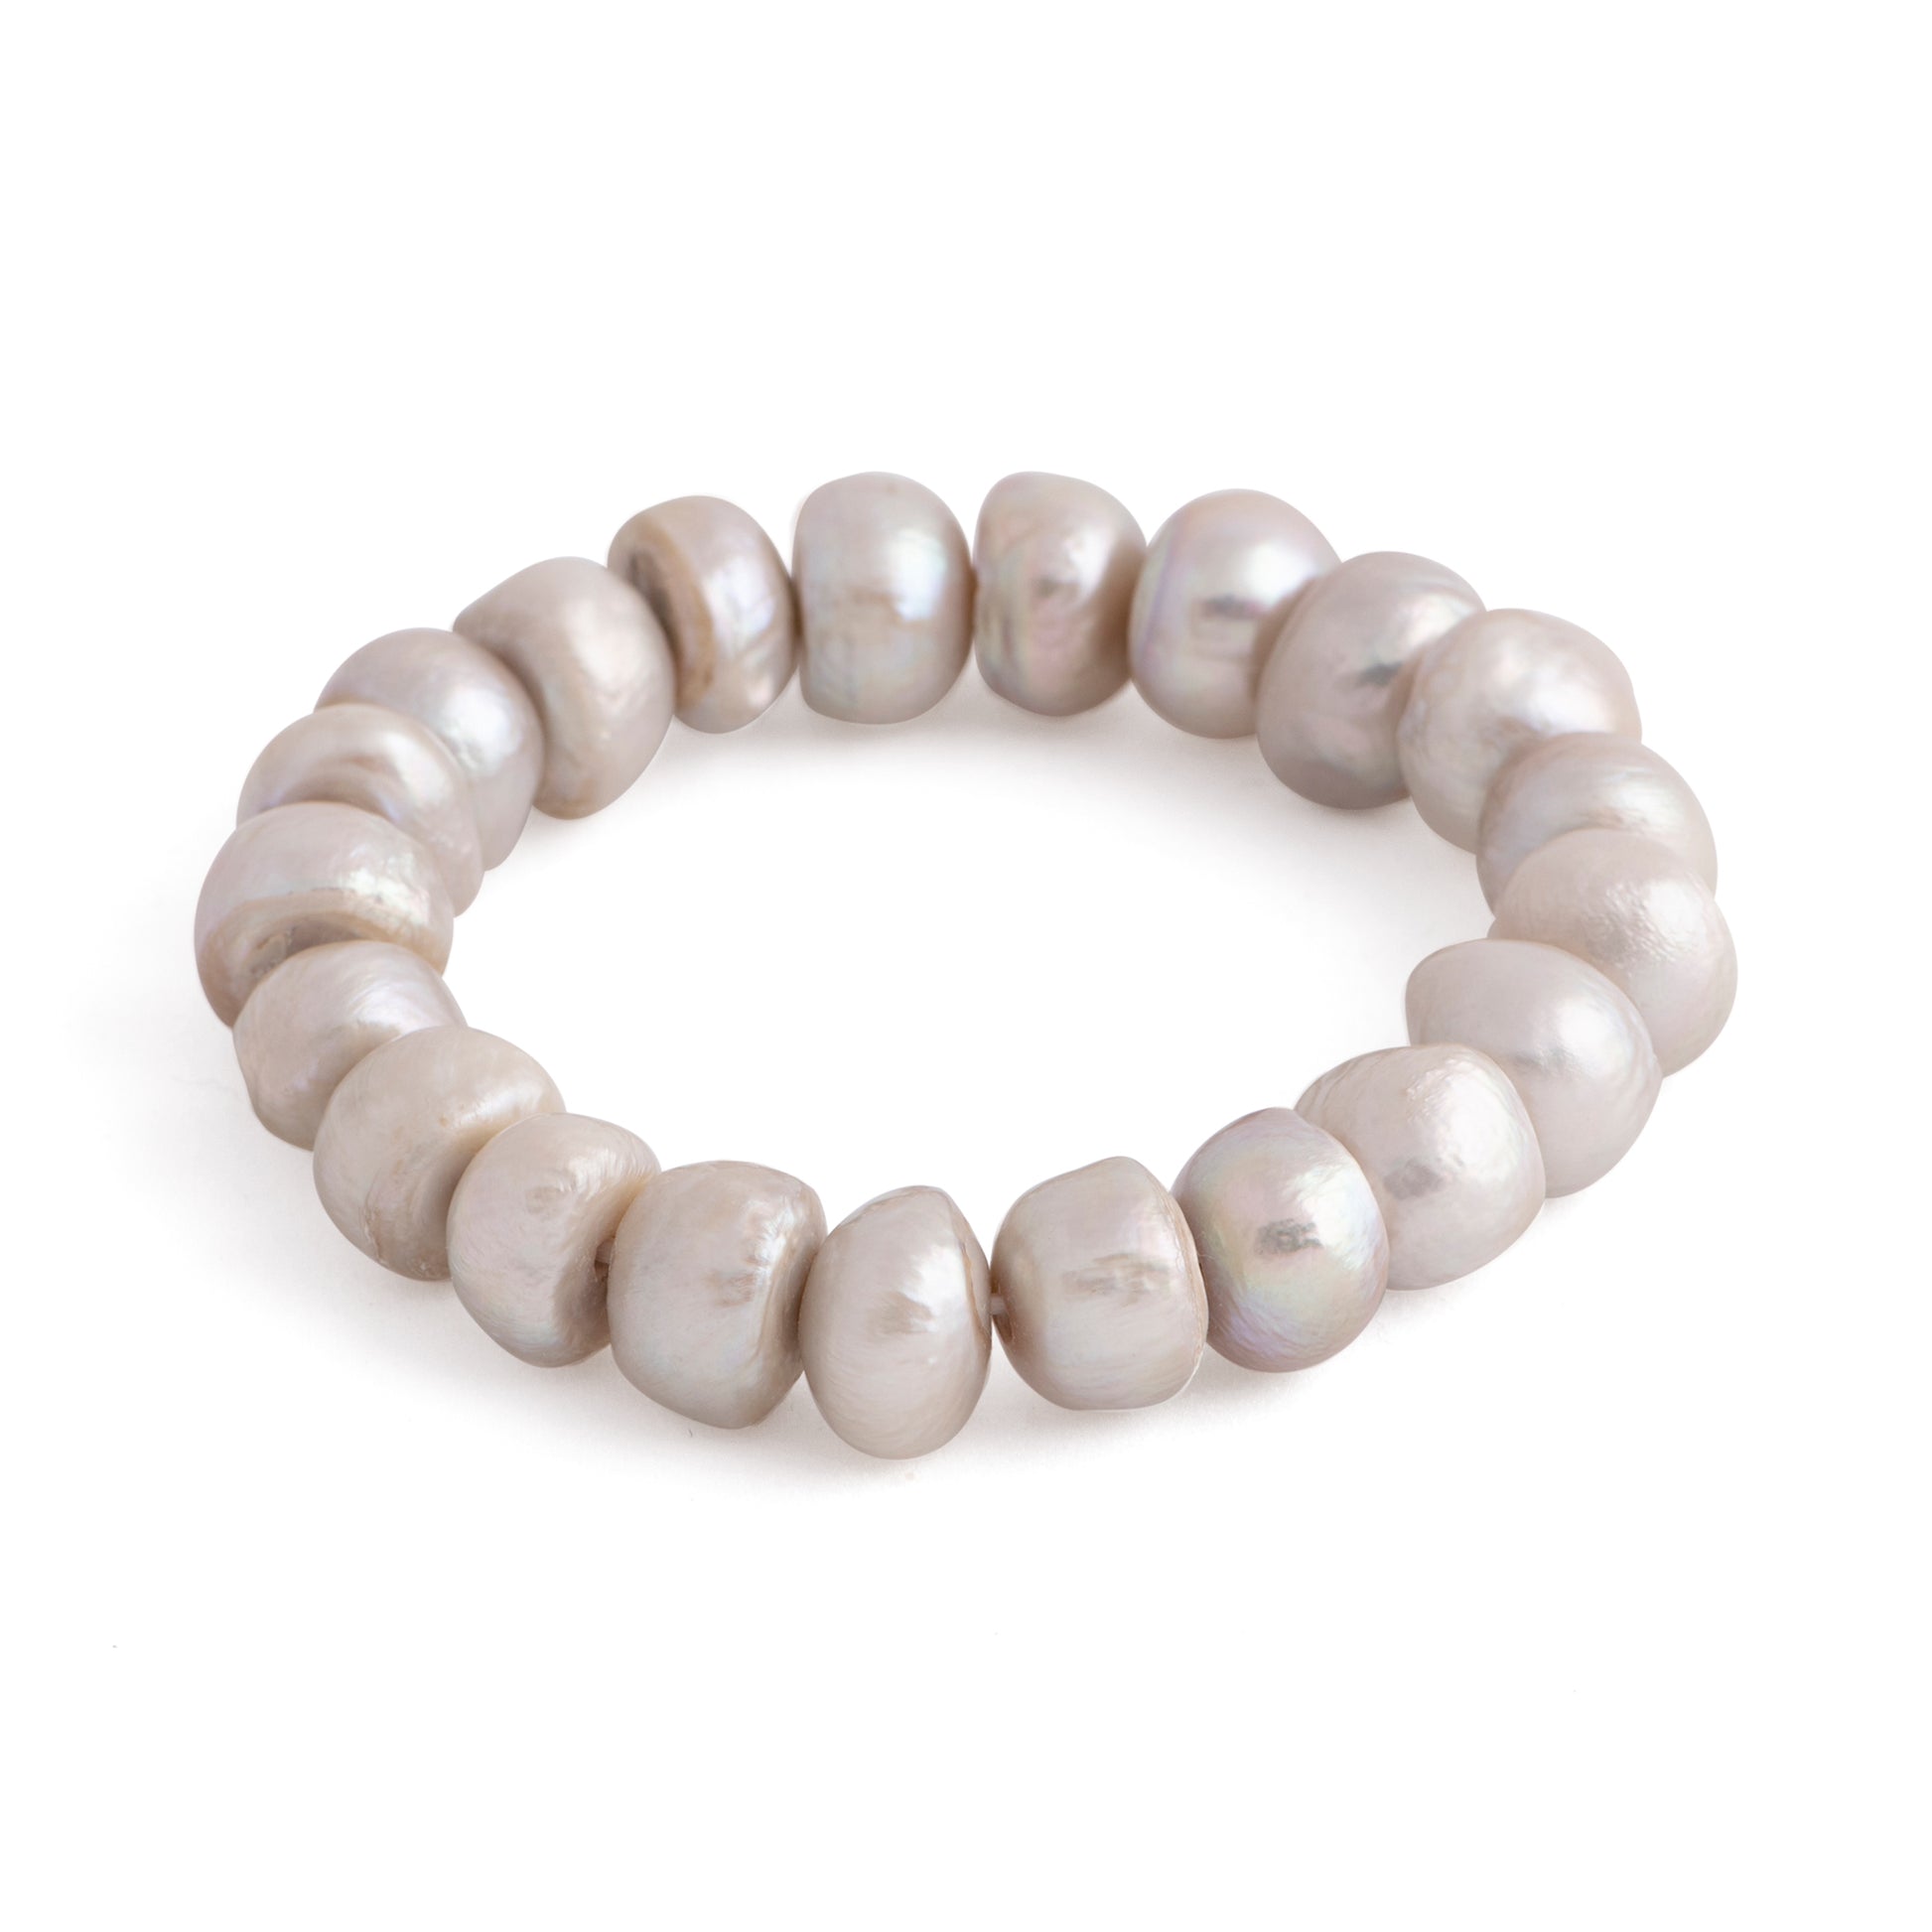 Euphrates - Freshwater pearl stretch bracelet (Champagne pearls)